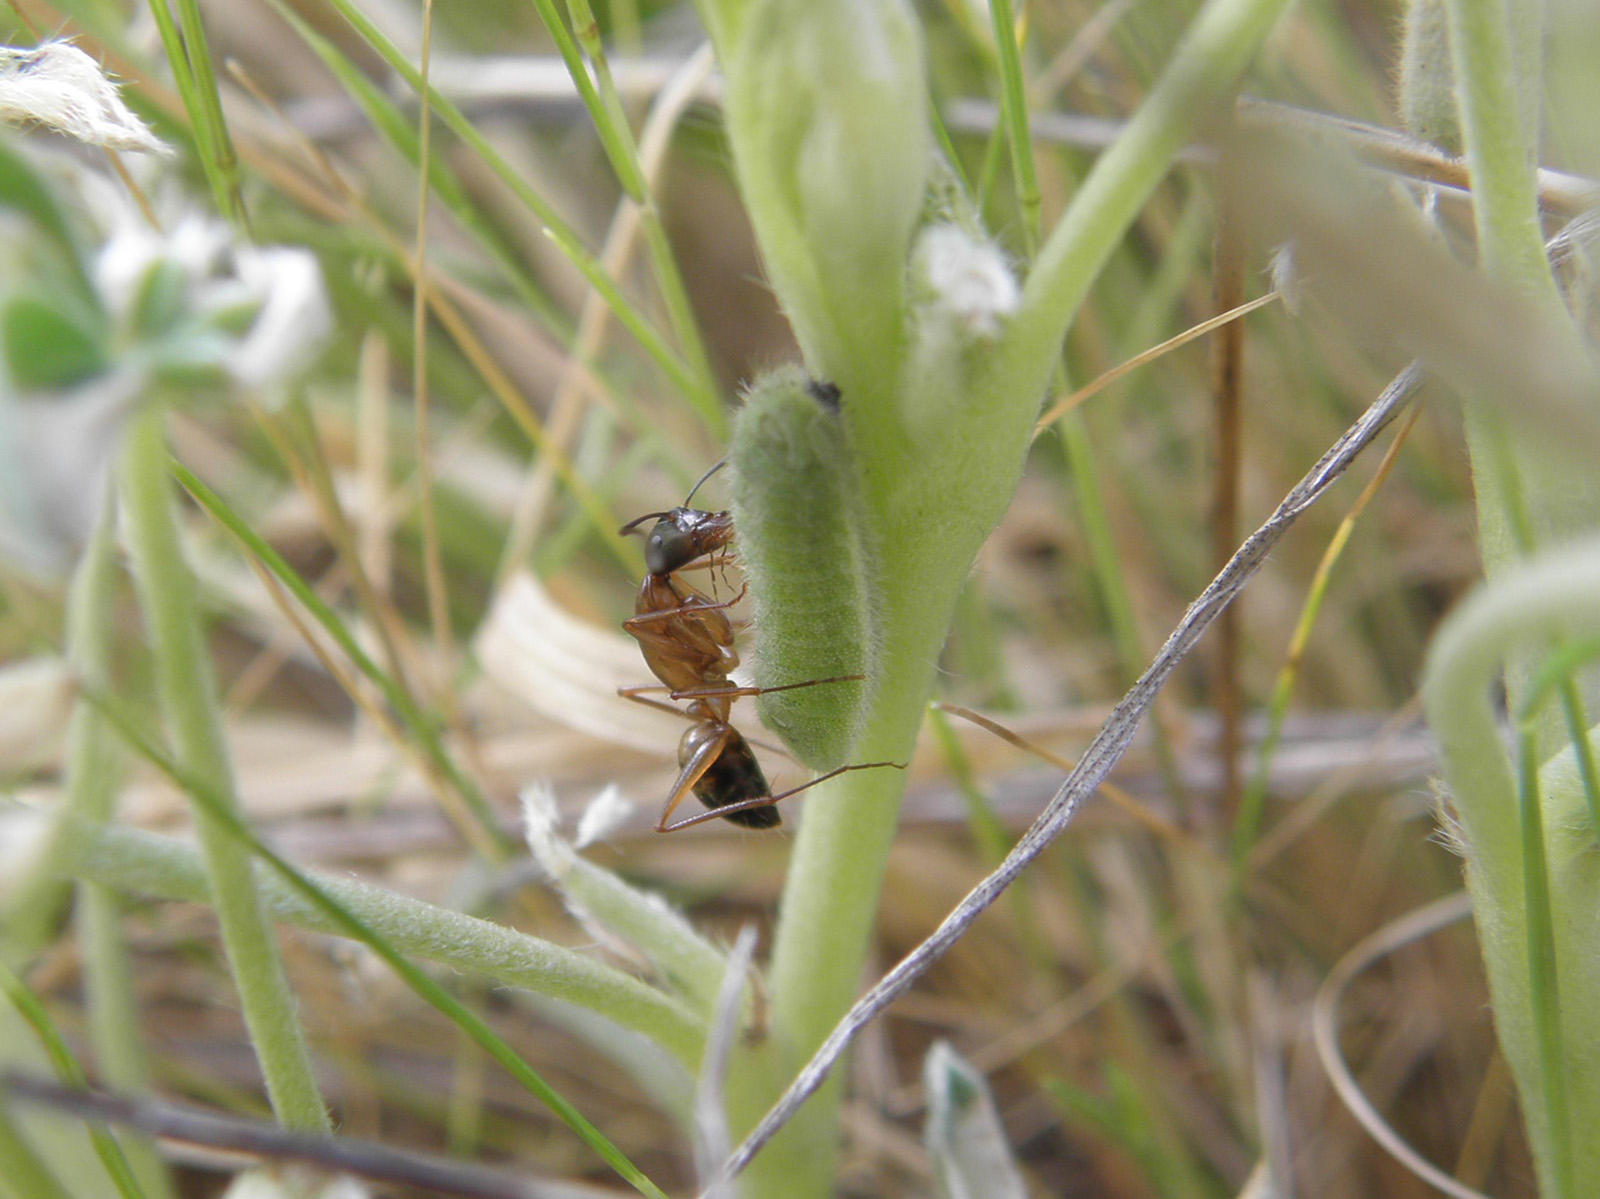 Close up between grass blades, showing a brown ant hovering over a fuzzy green caterpillar.